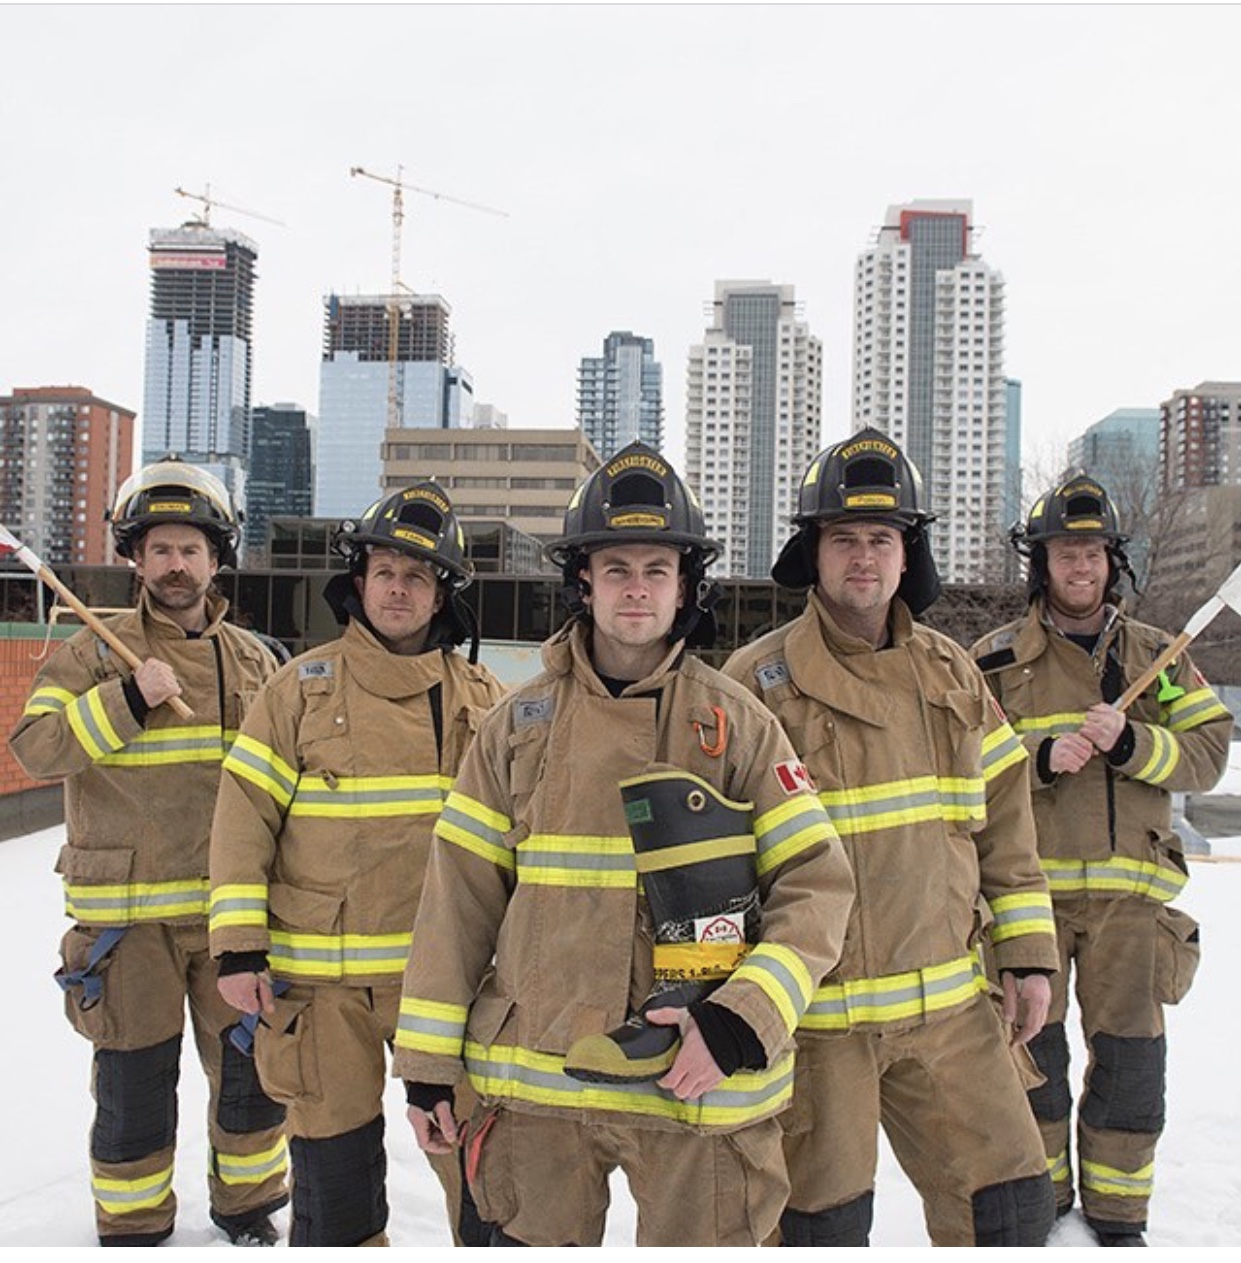 edmonton-firefighters-rooftop-campout-for-muscular-dystrophy-globalnews-events